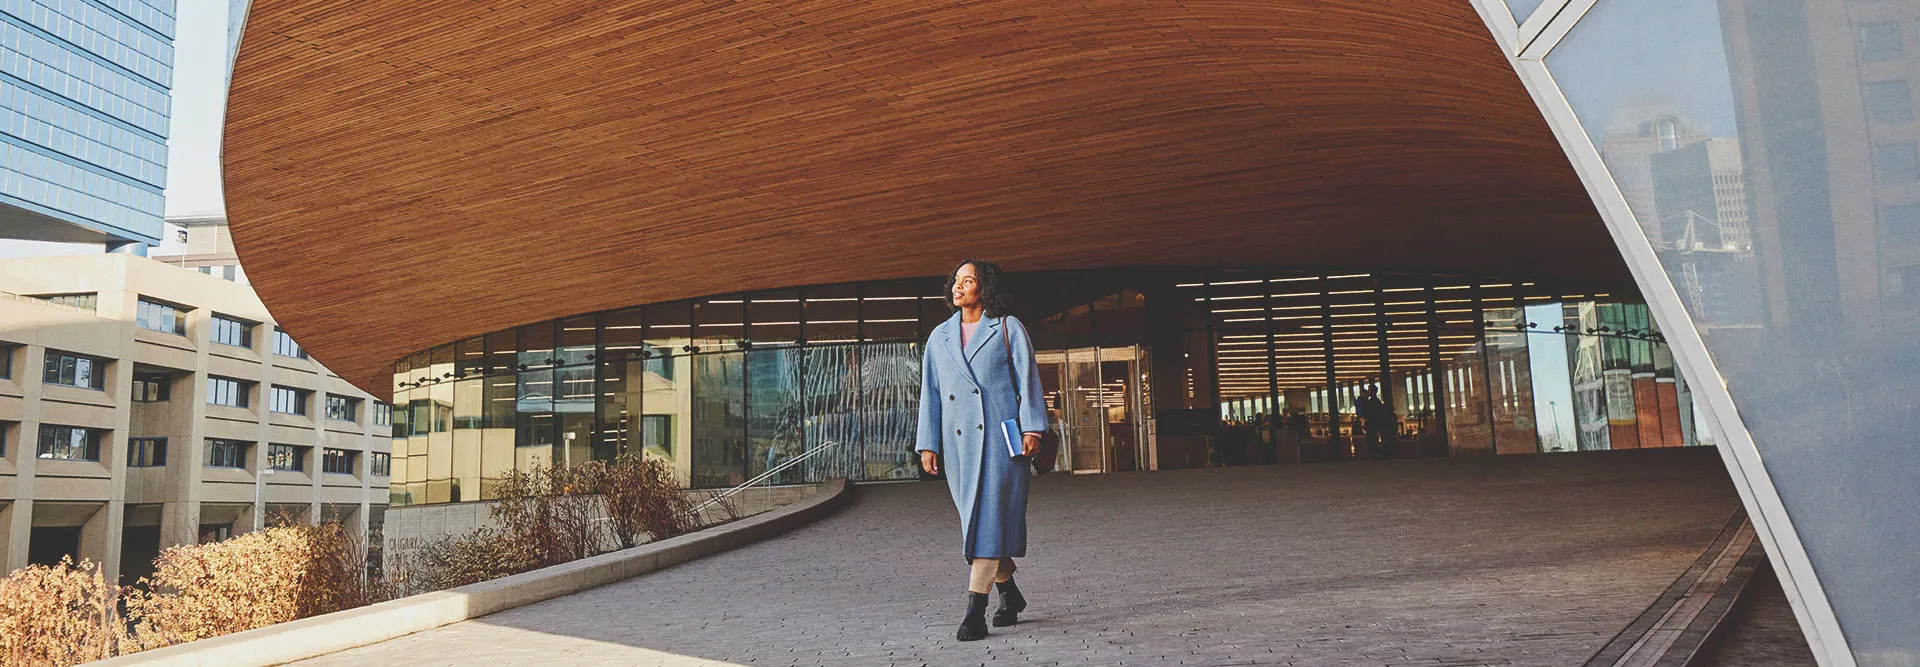 woman walking outdoors in front of Calgary Central Library